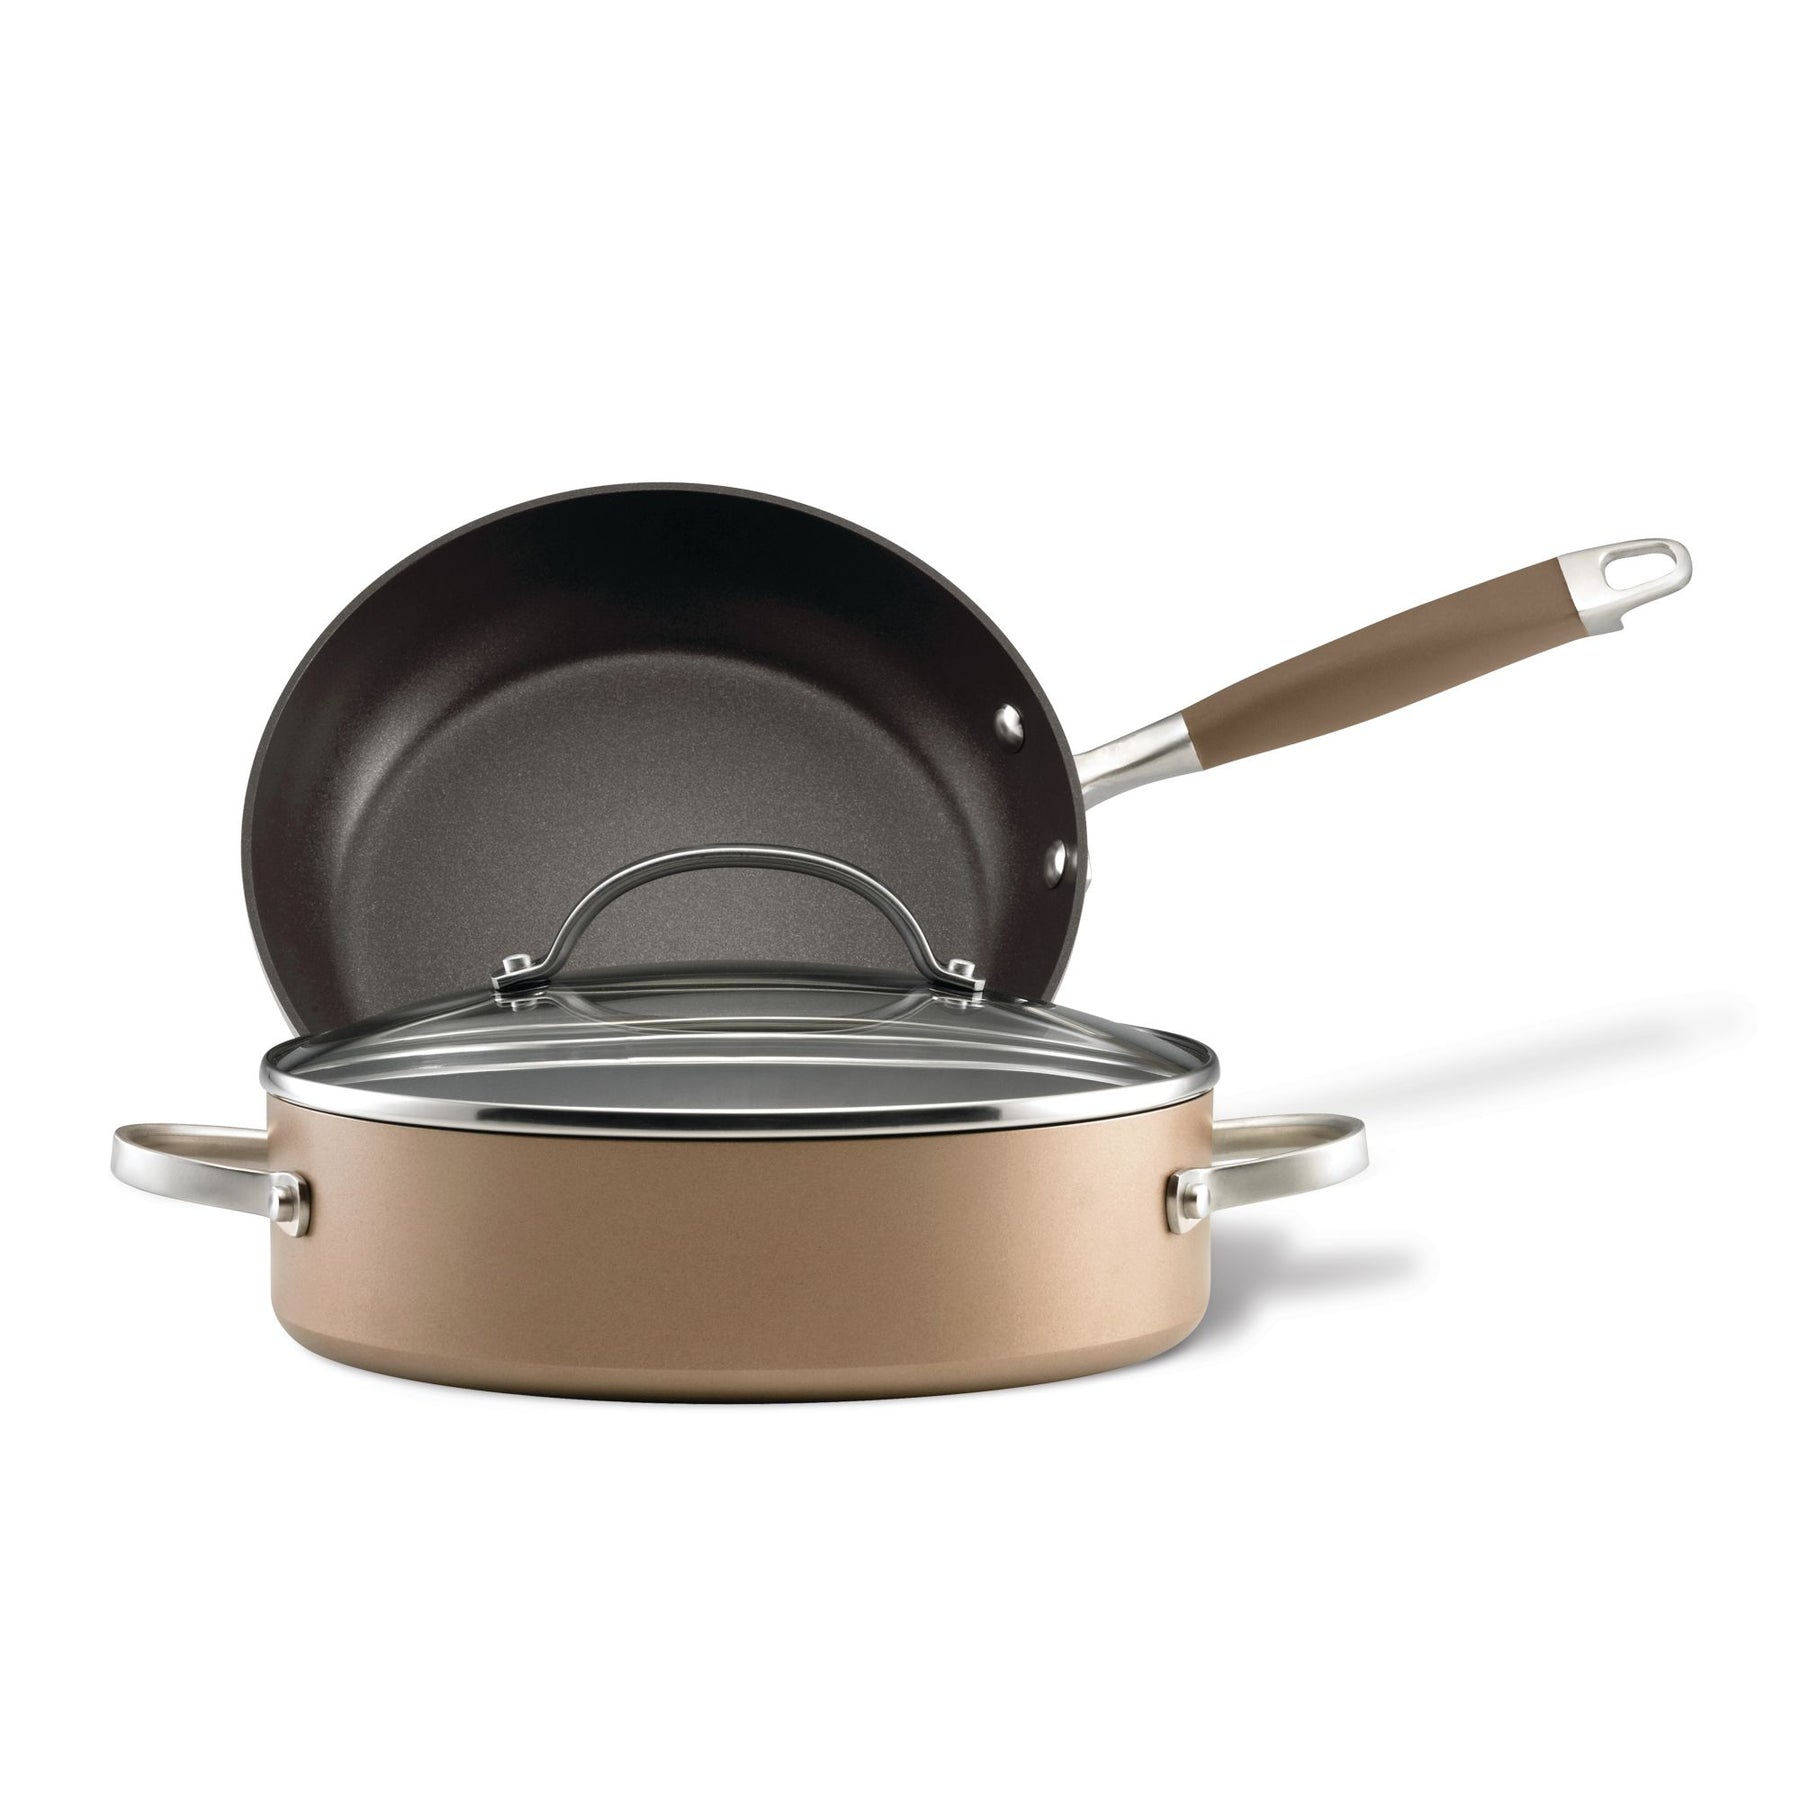 Anolon Tri-ply Clad Stainless Steel 10 1/4-inch Nonstick French